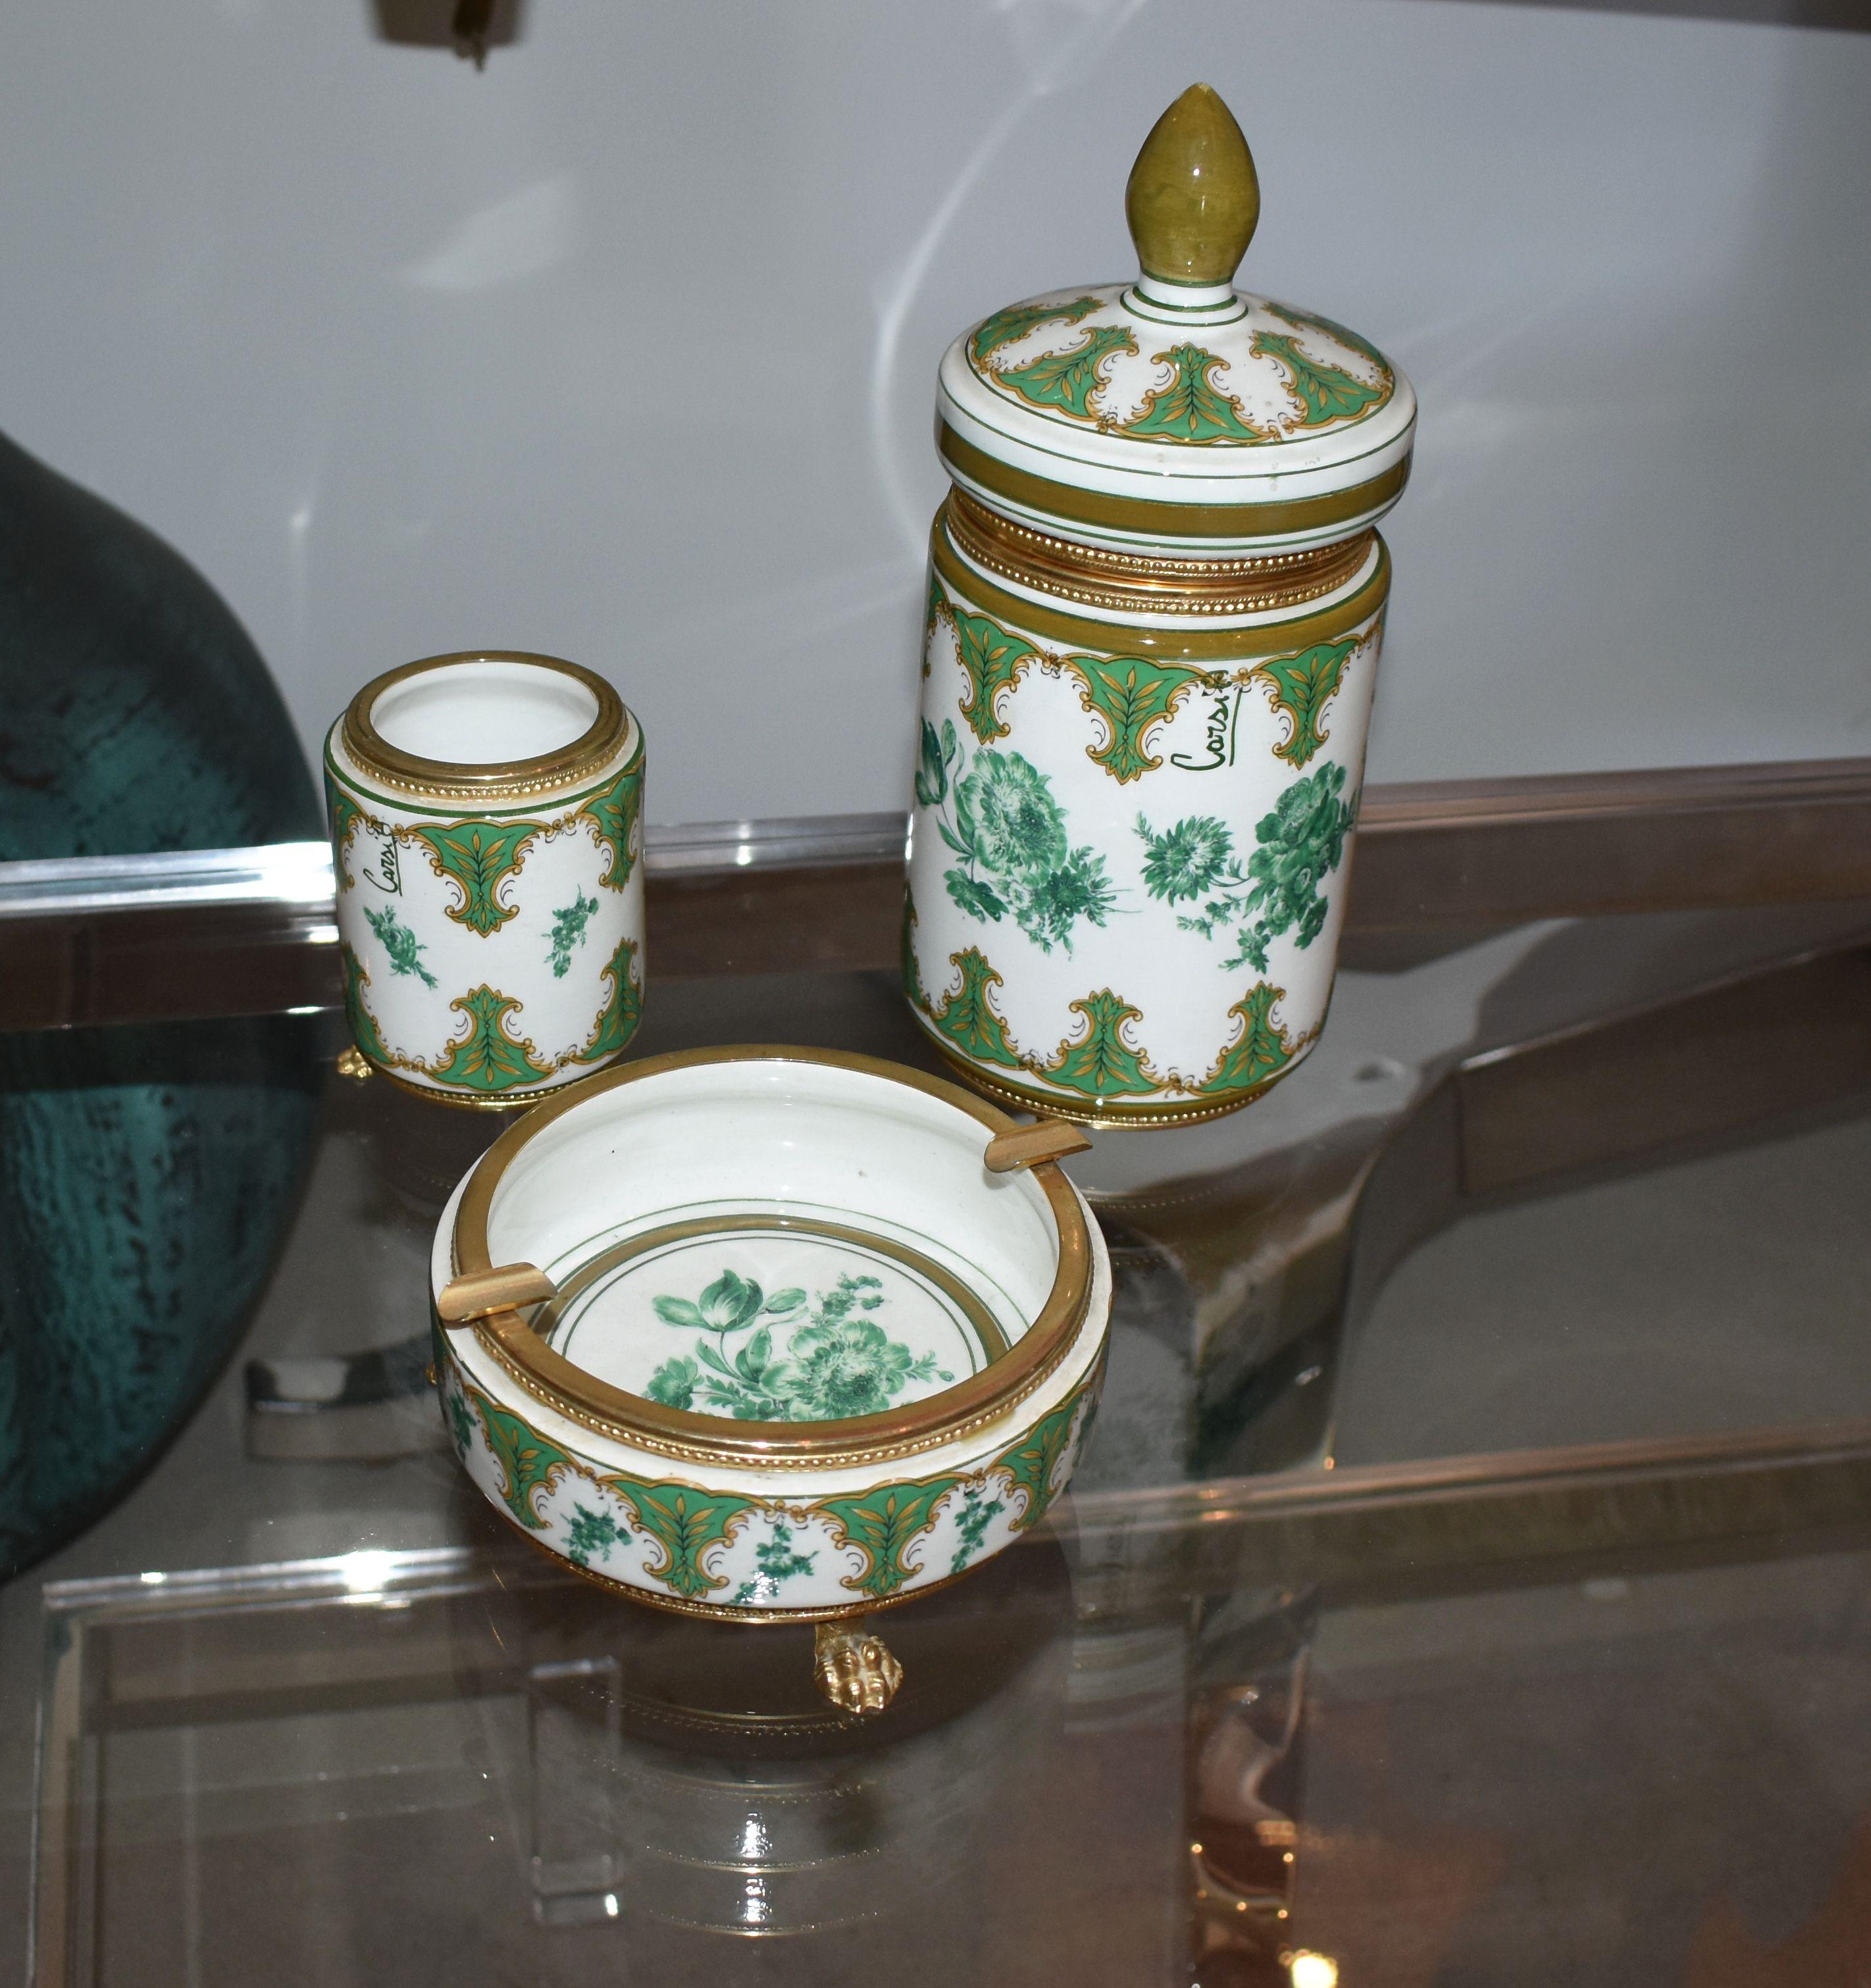 Three pieces smoking set by Corsi A. for J.B. Hirsch Co.

Measurements:
Ashtray diameter 5.25 inches h 2.5 inches
Jar diam 4 inches height 9.5 inches
Match holder diameter 2.75 inches height 3.75 inches

Exquisite Jar, match holder and